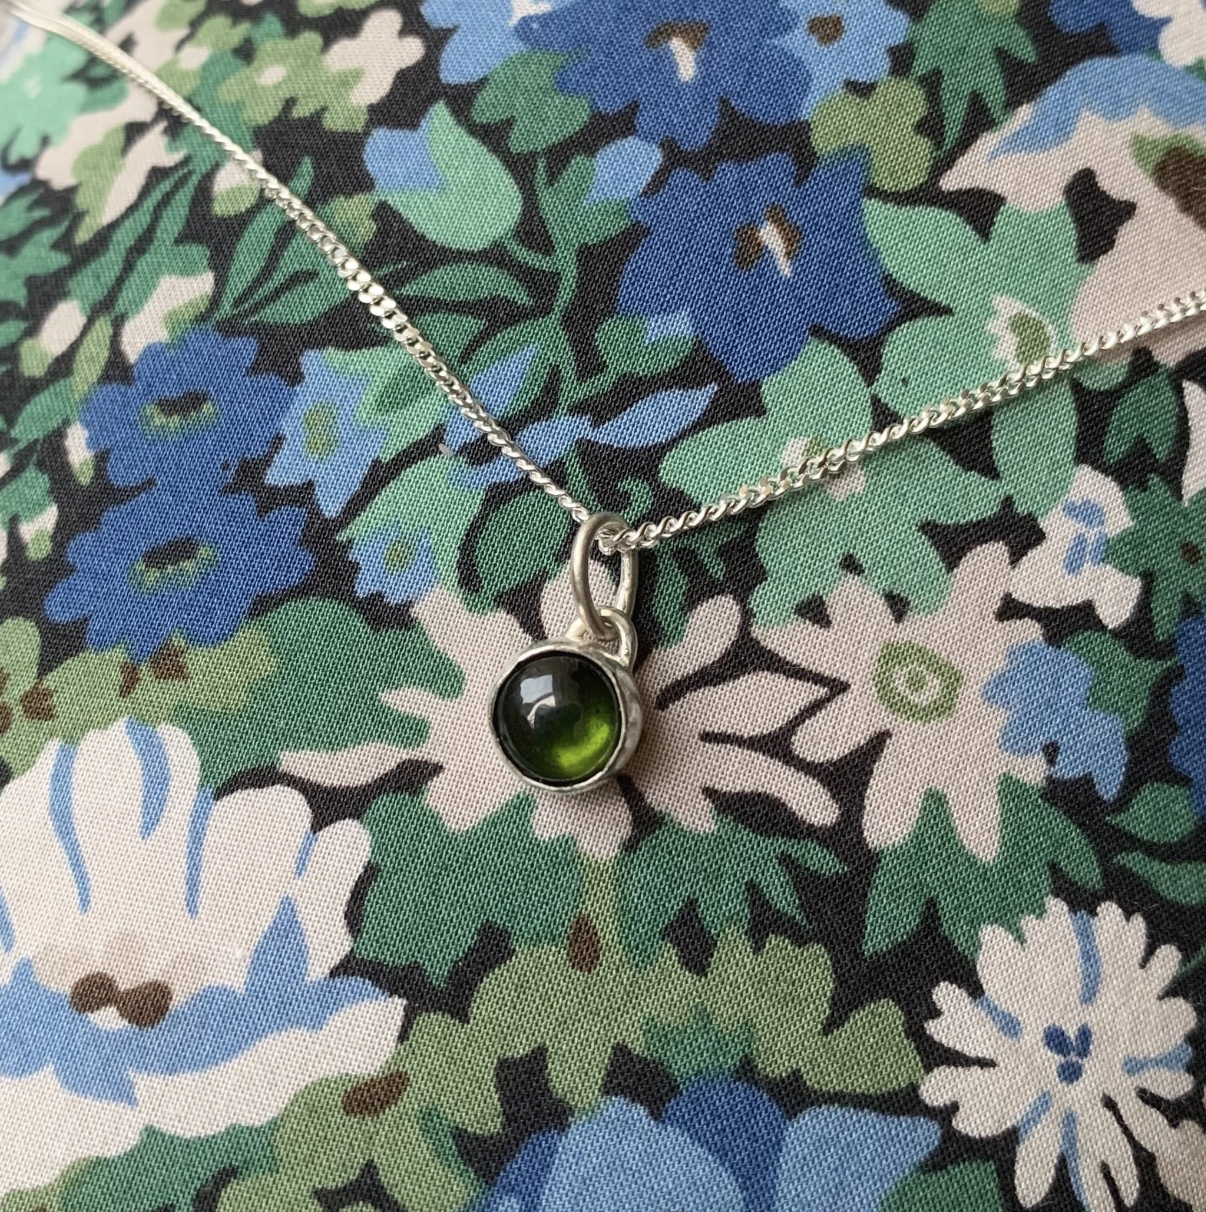 A green tourmaline and sterling silver charm necklace.